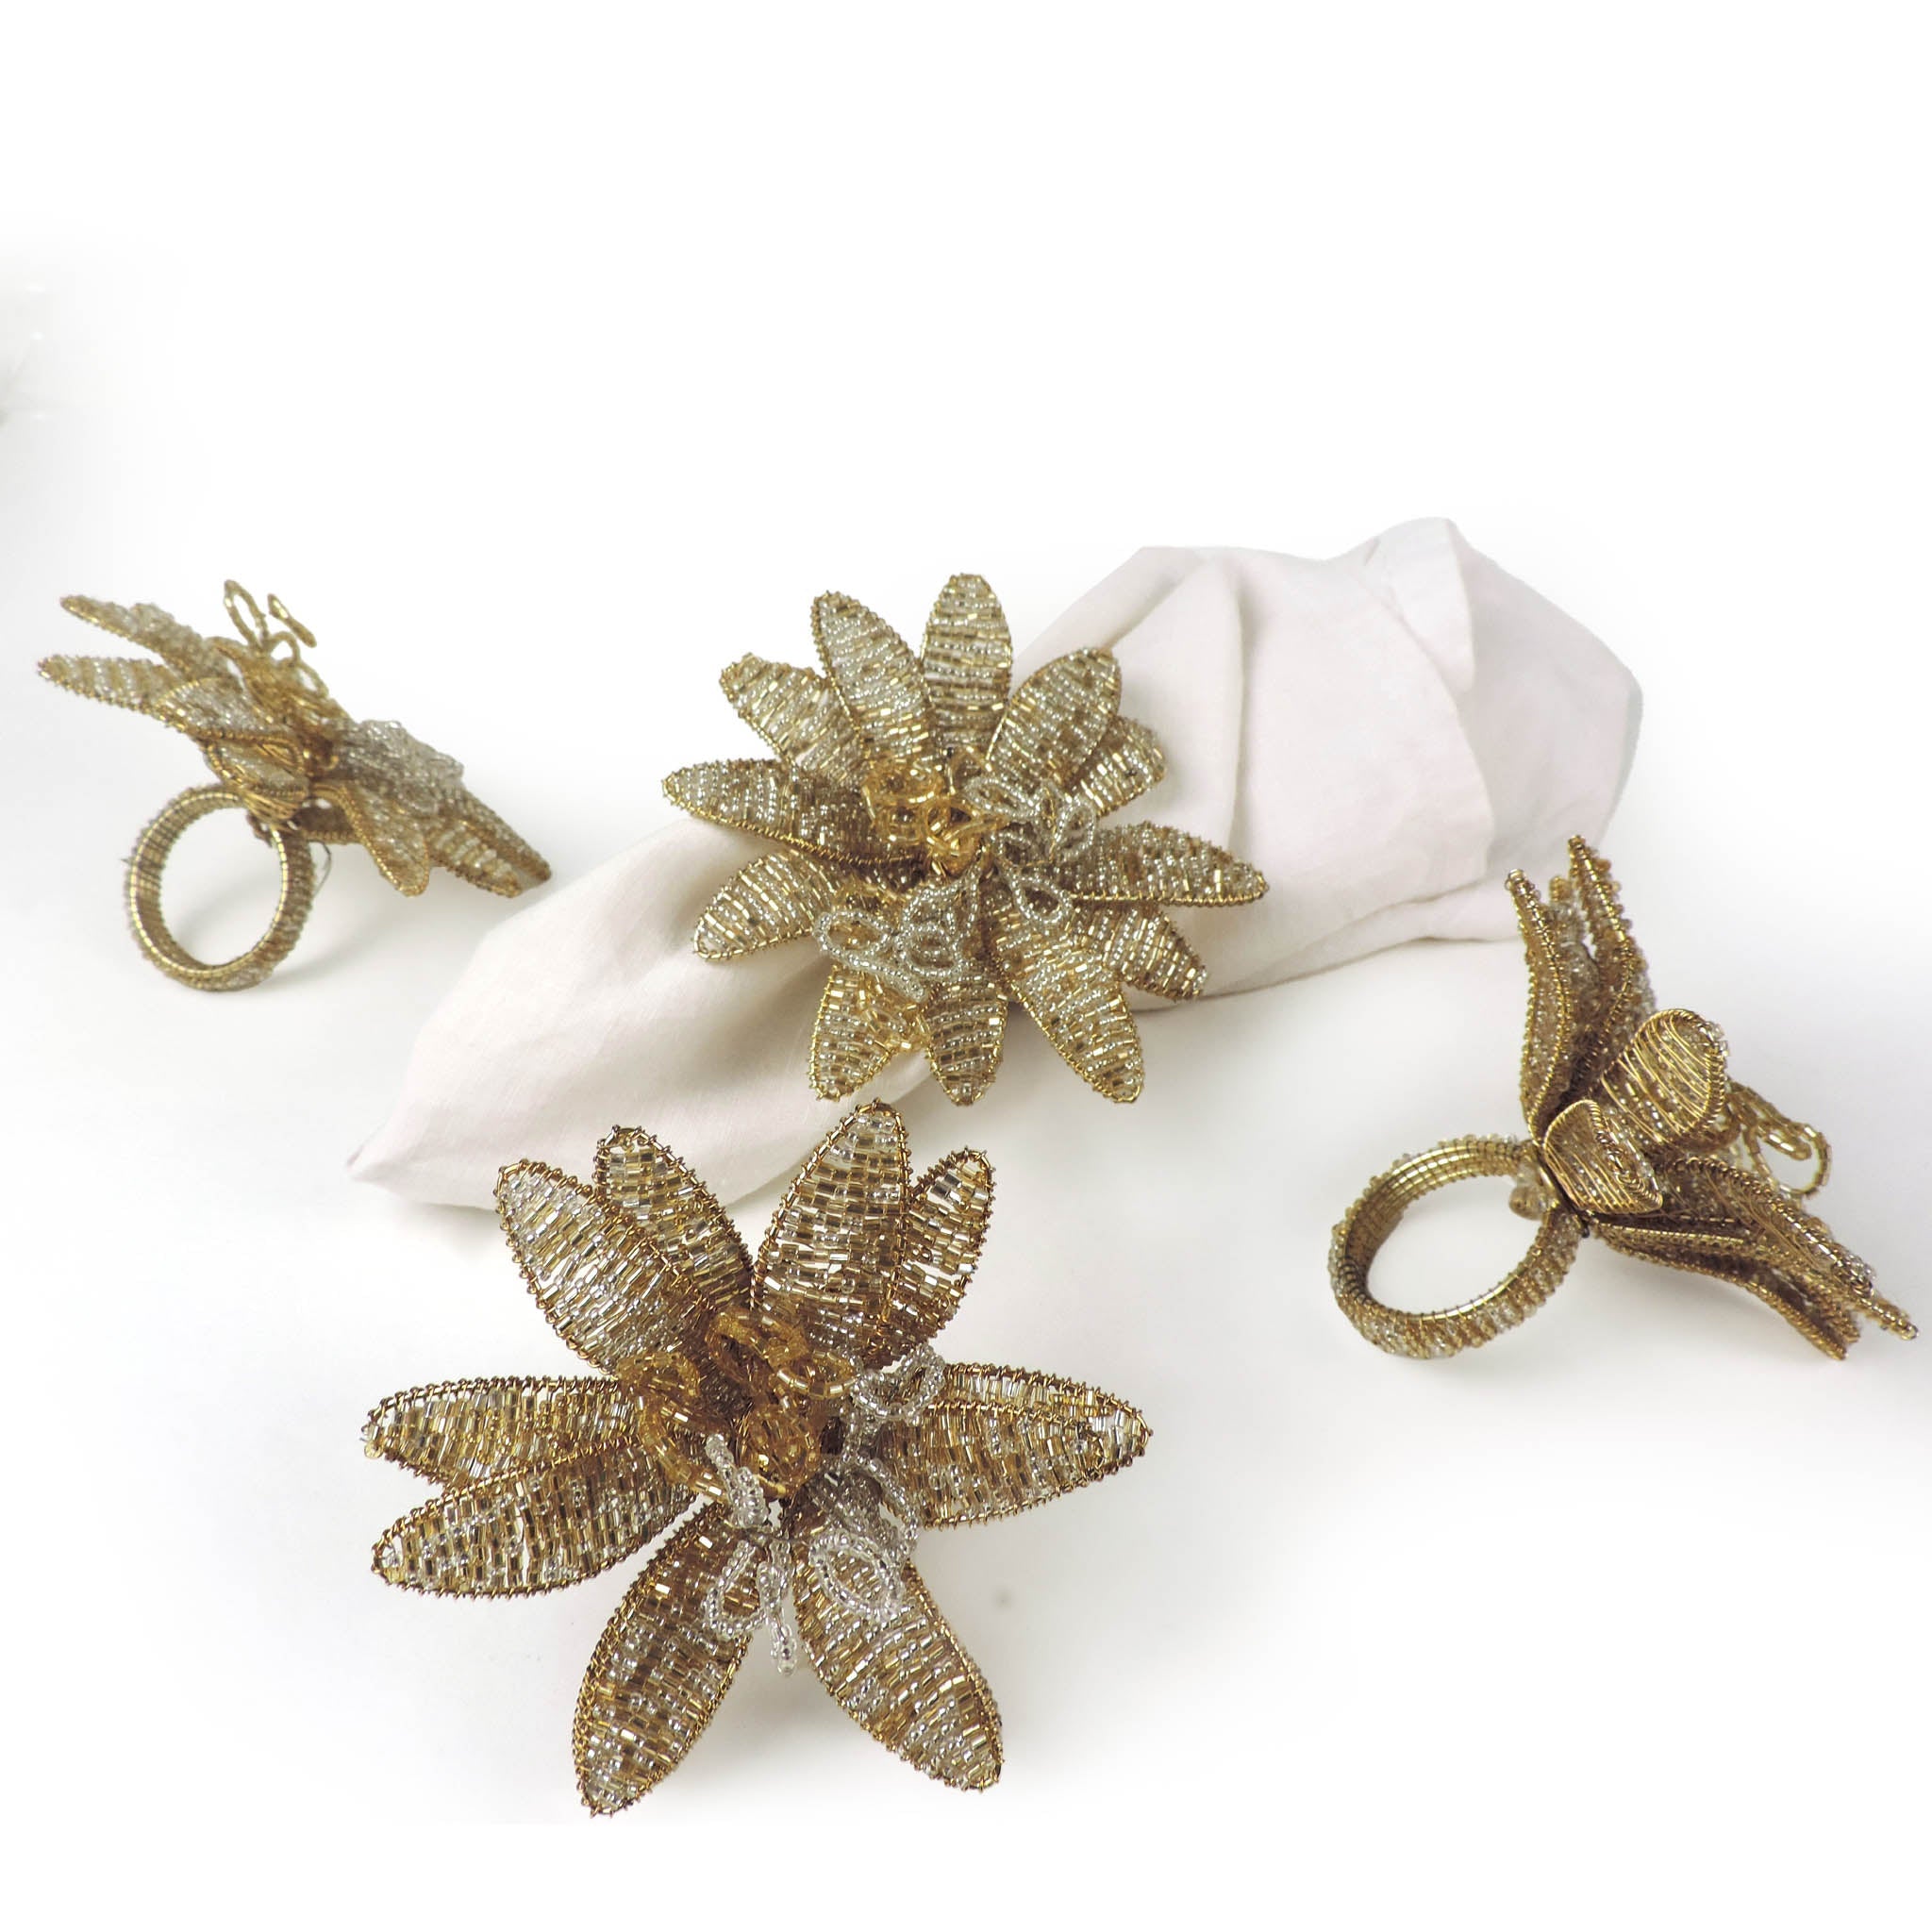 Gilded Lily Napkin Ring in Gold & Silver, Set of 4